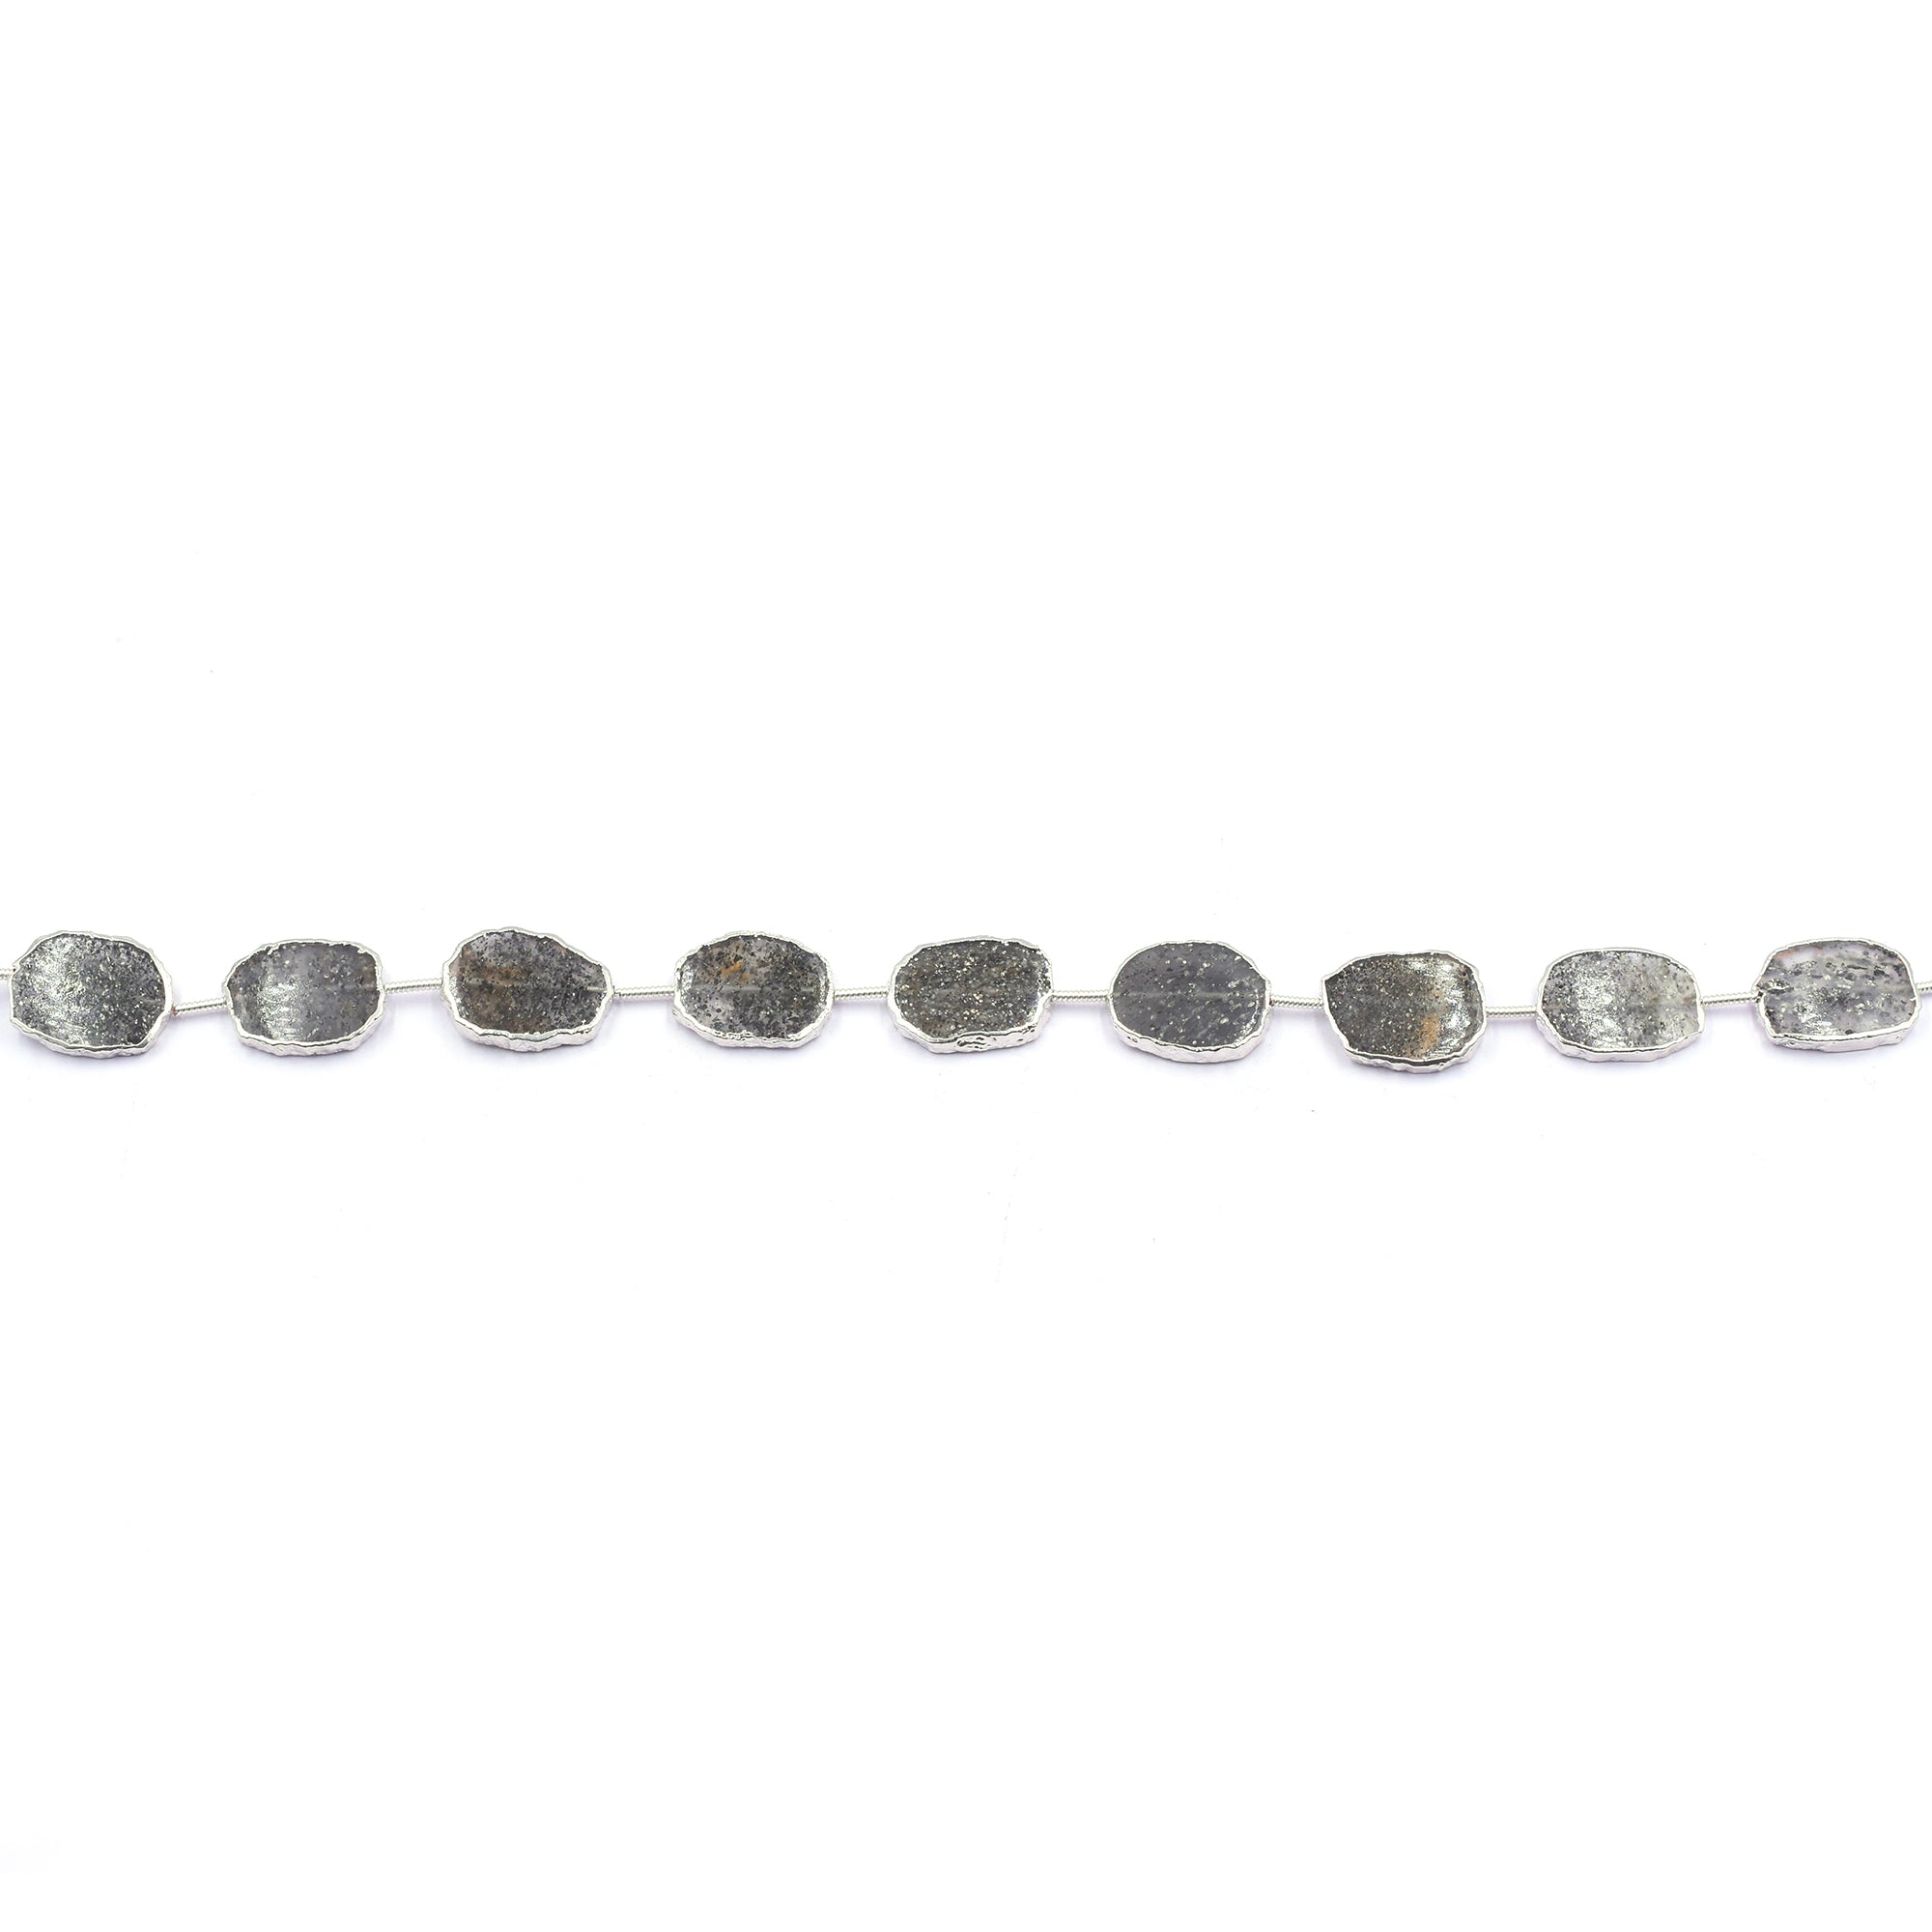 Black Sunstone 15X12 MM Uneven Shape Straight Drilled Rhodium Electroplated Strand